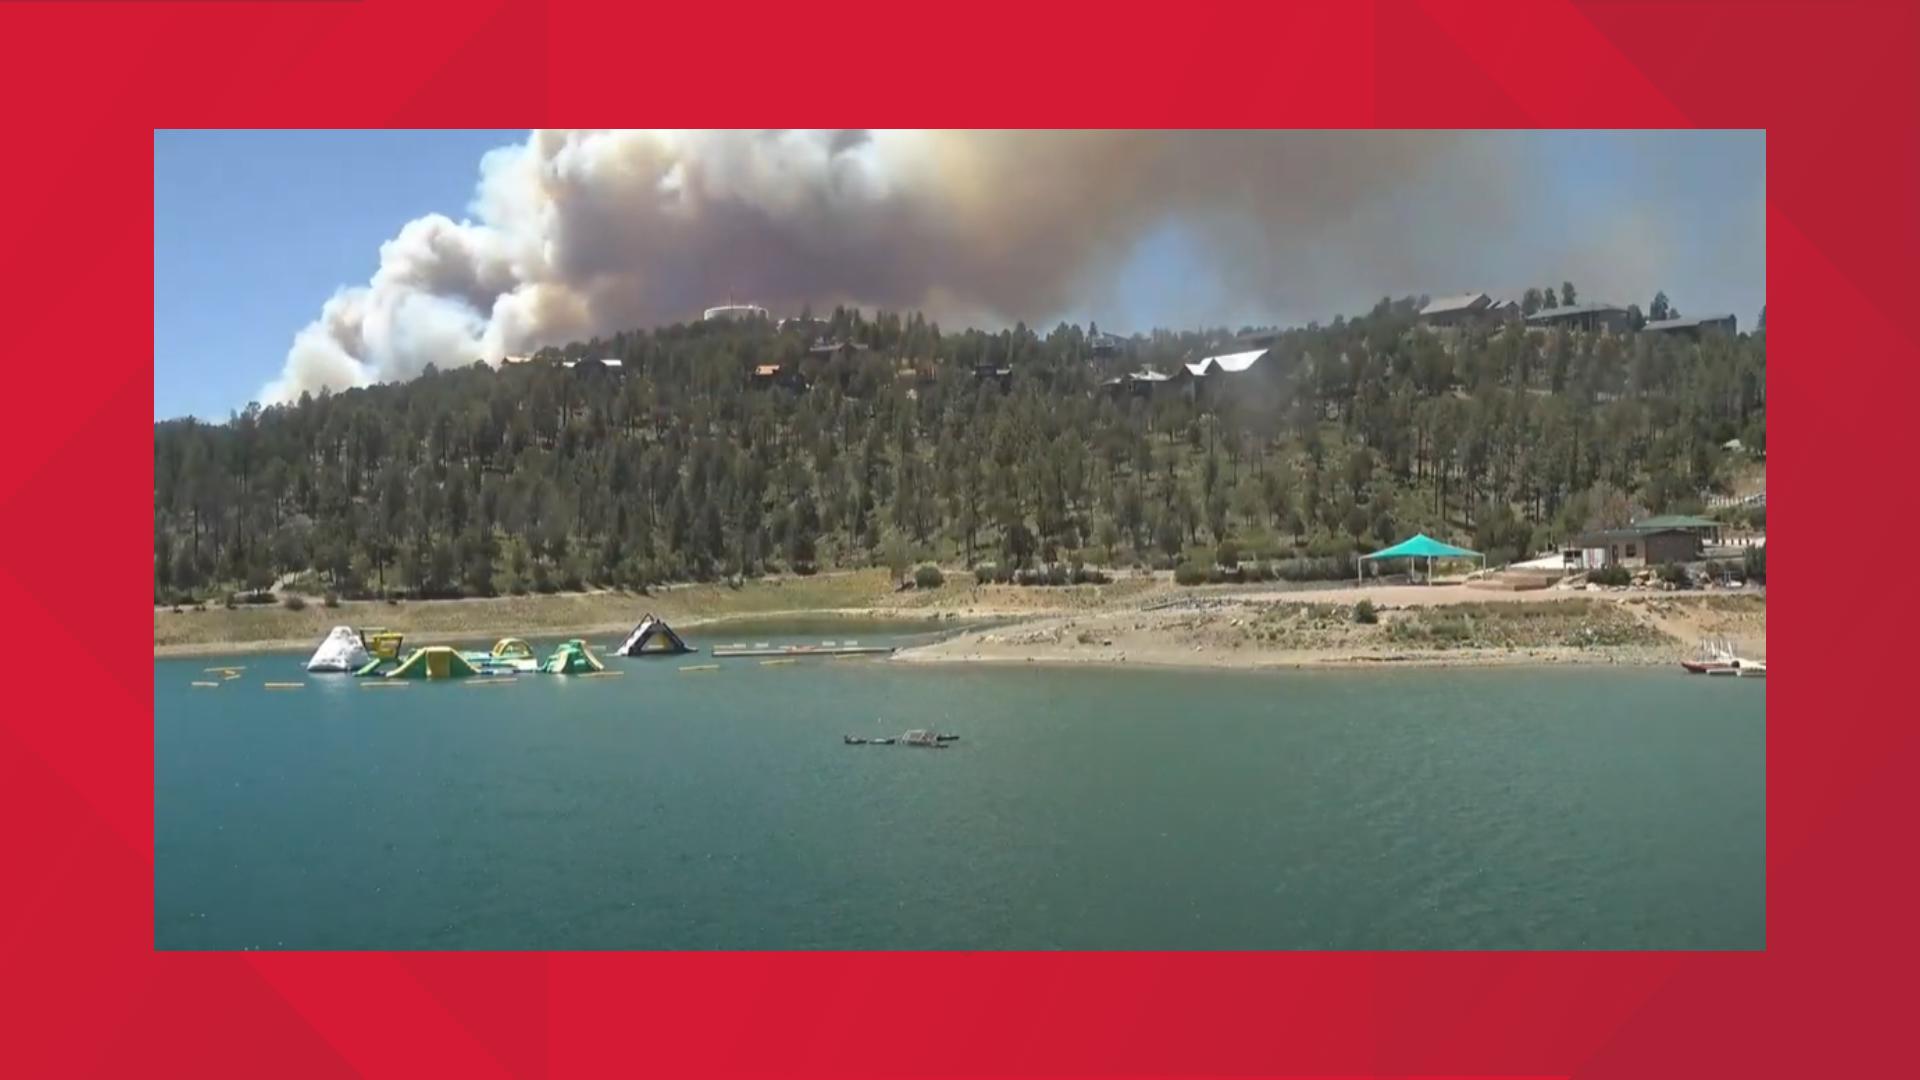 EarthCam captured the South Fork Fire from three separate camera angles, documenting the blaze as it covered approximately 8.2 square miles by Monday night.